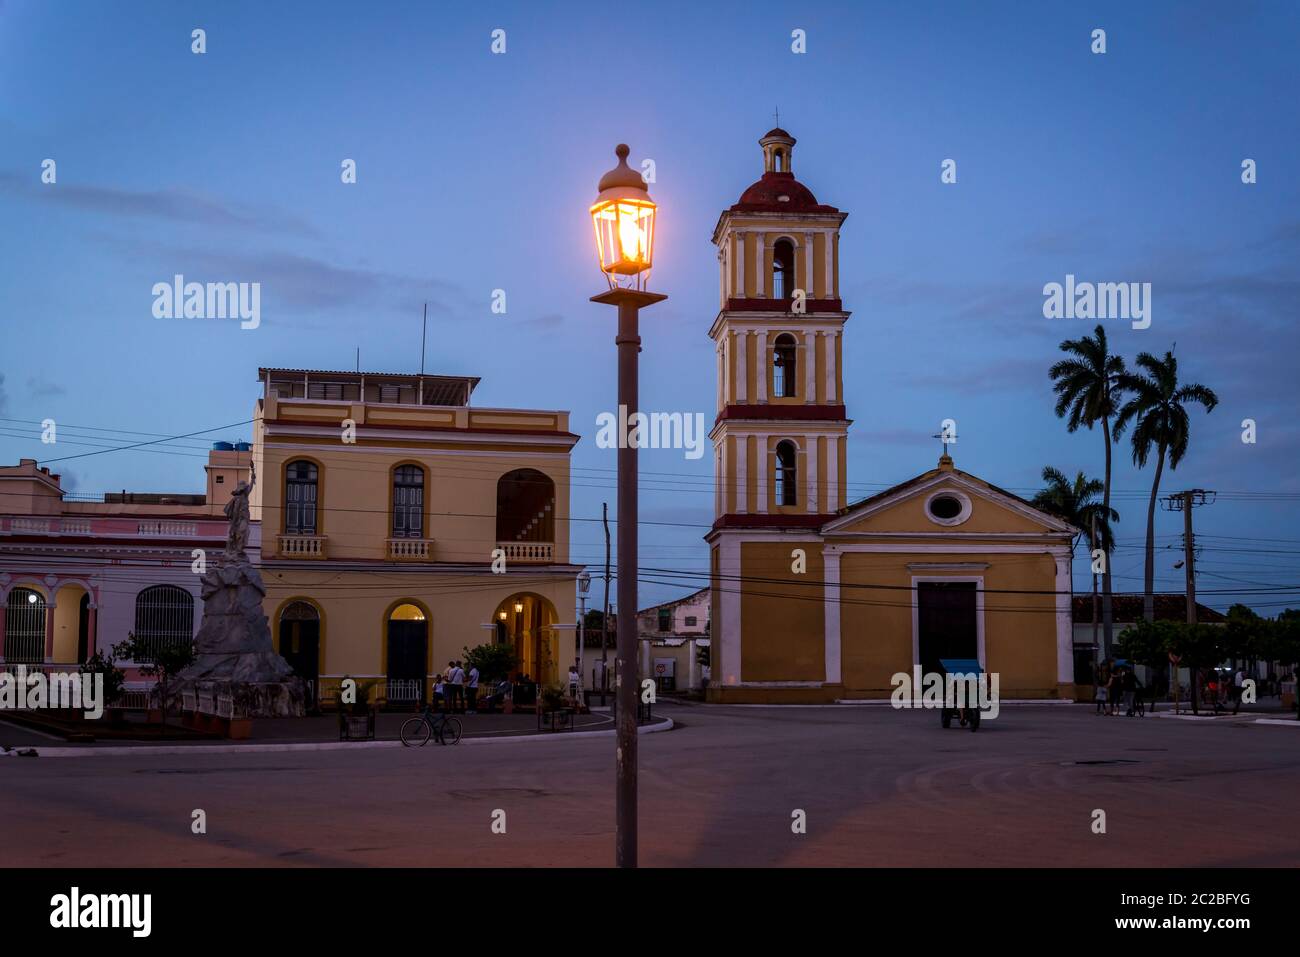 Atmospheric Central square with a church and illuminated street lamp, Remedios, Cuba Stock Photo